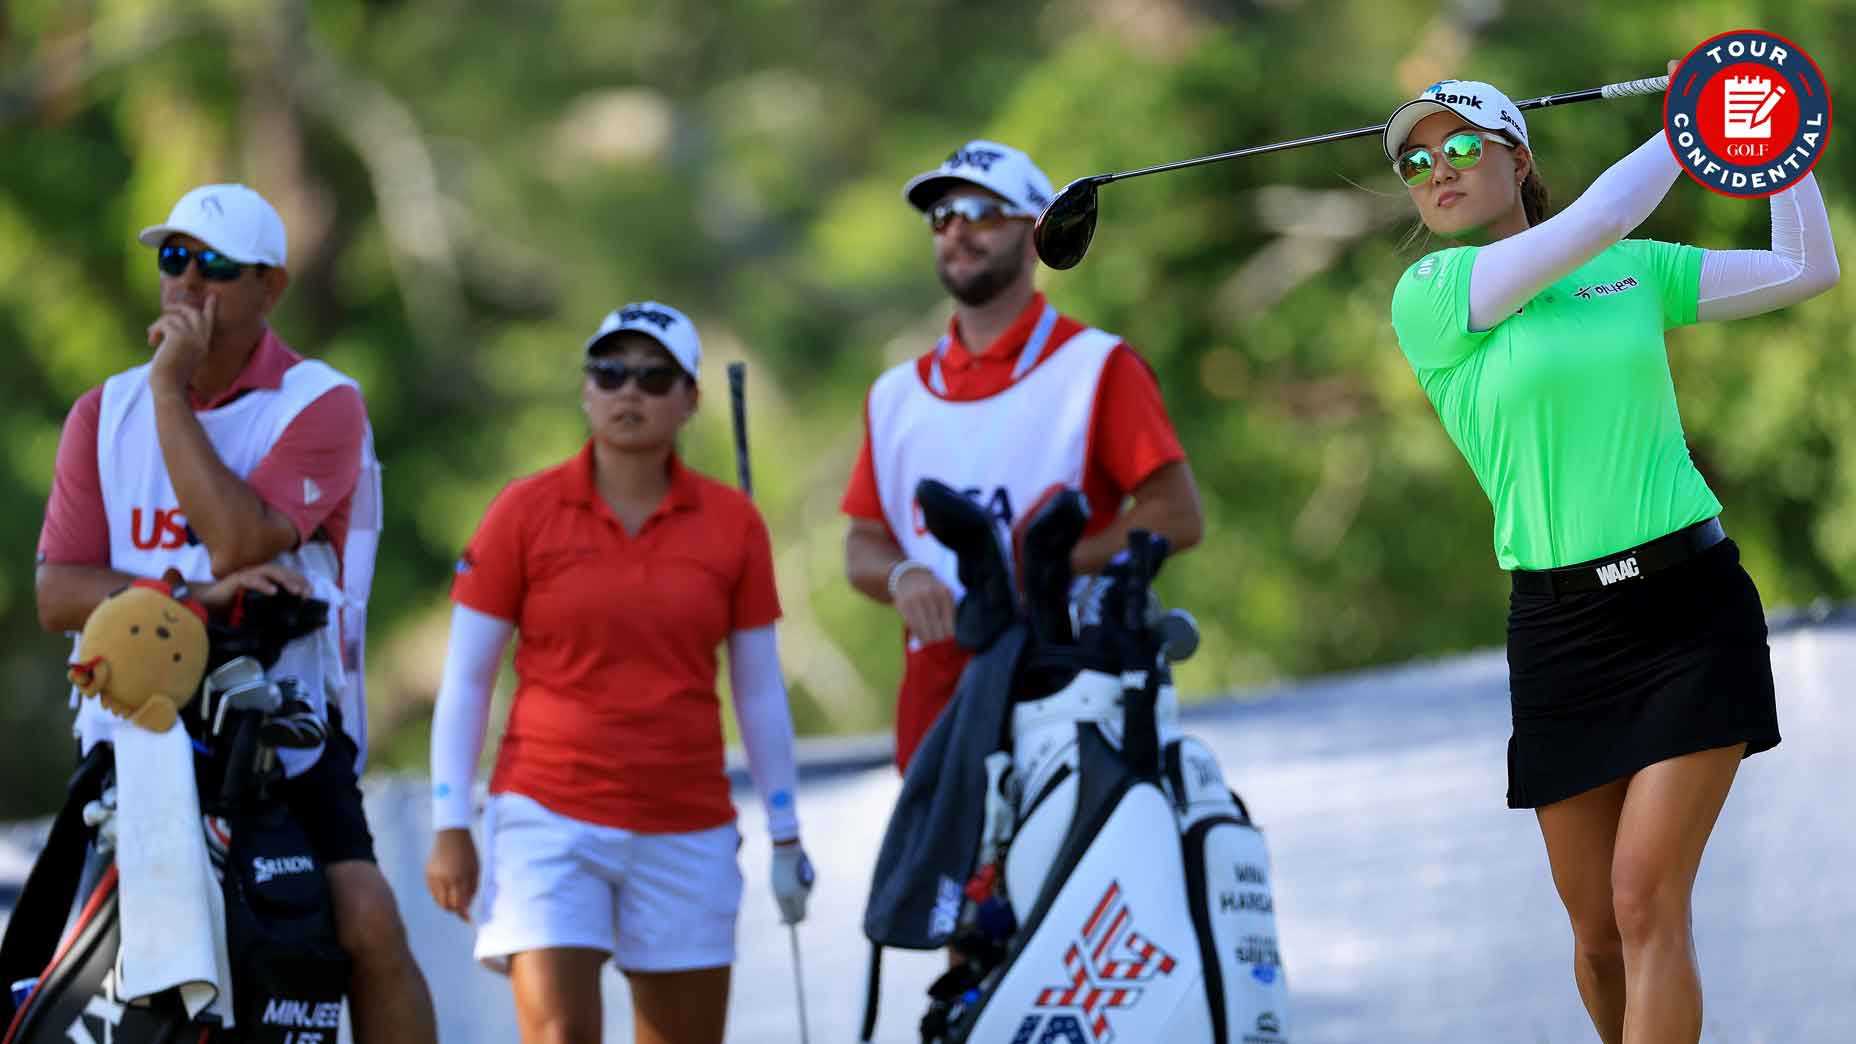 Minjee Lee hits driver at US Women's Open